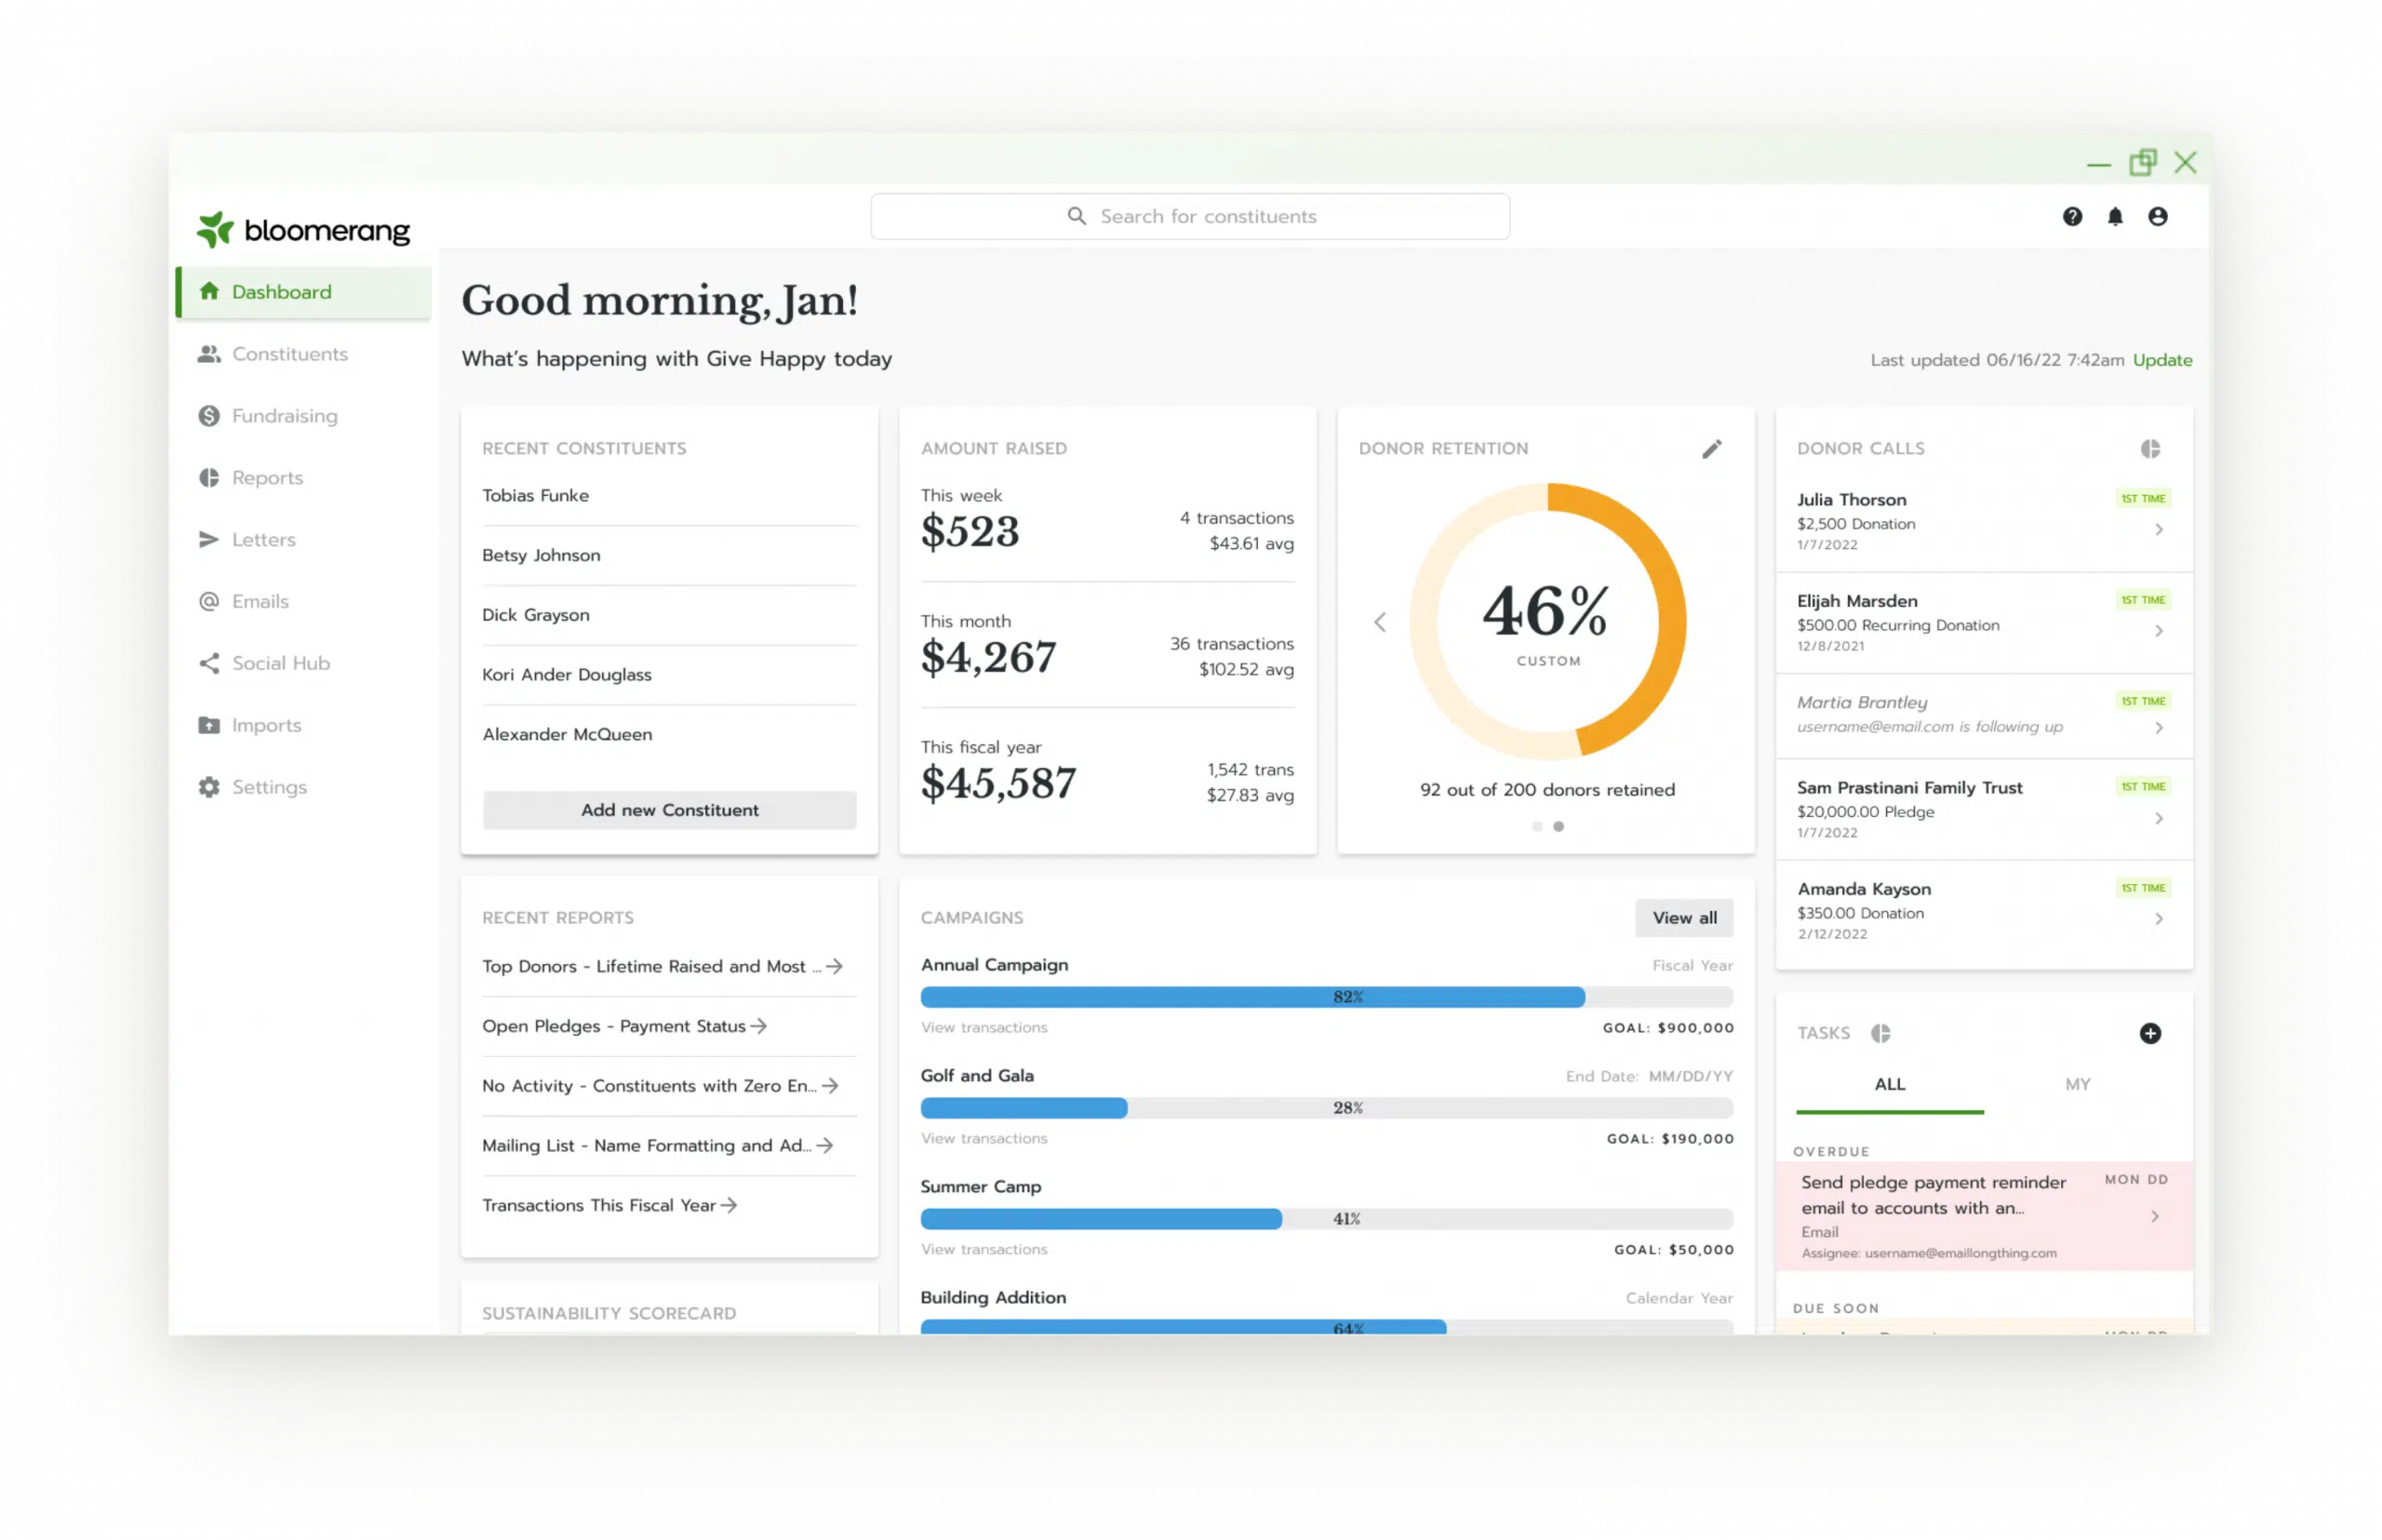 This is an example of a dashboard that can show important online fundraising metrics.